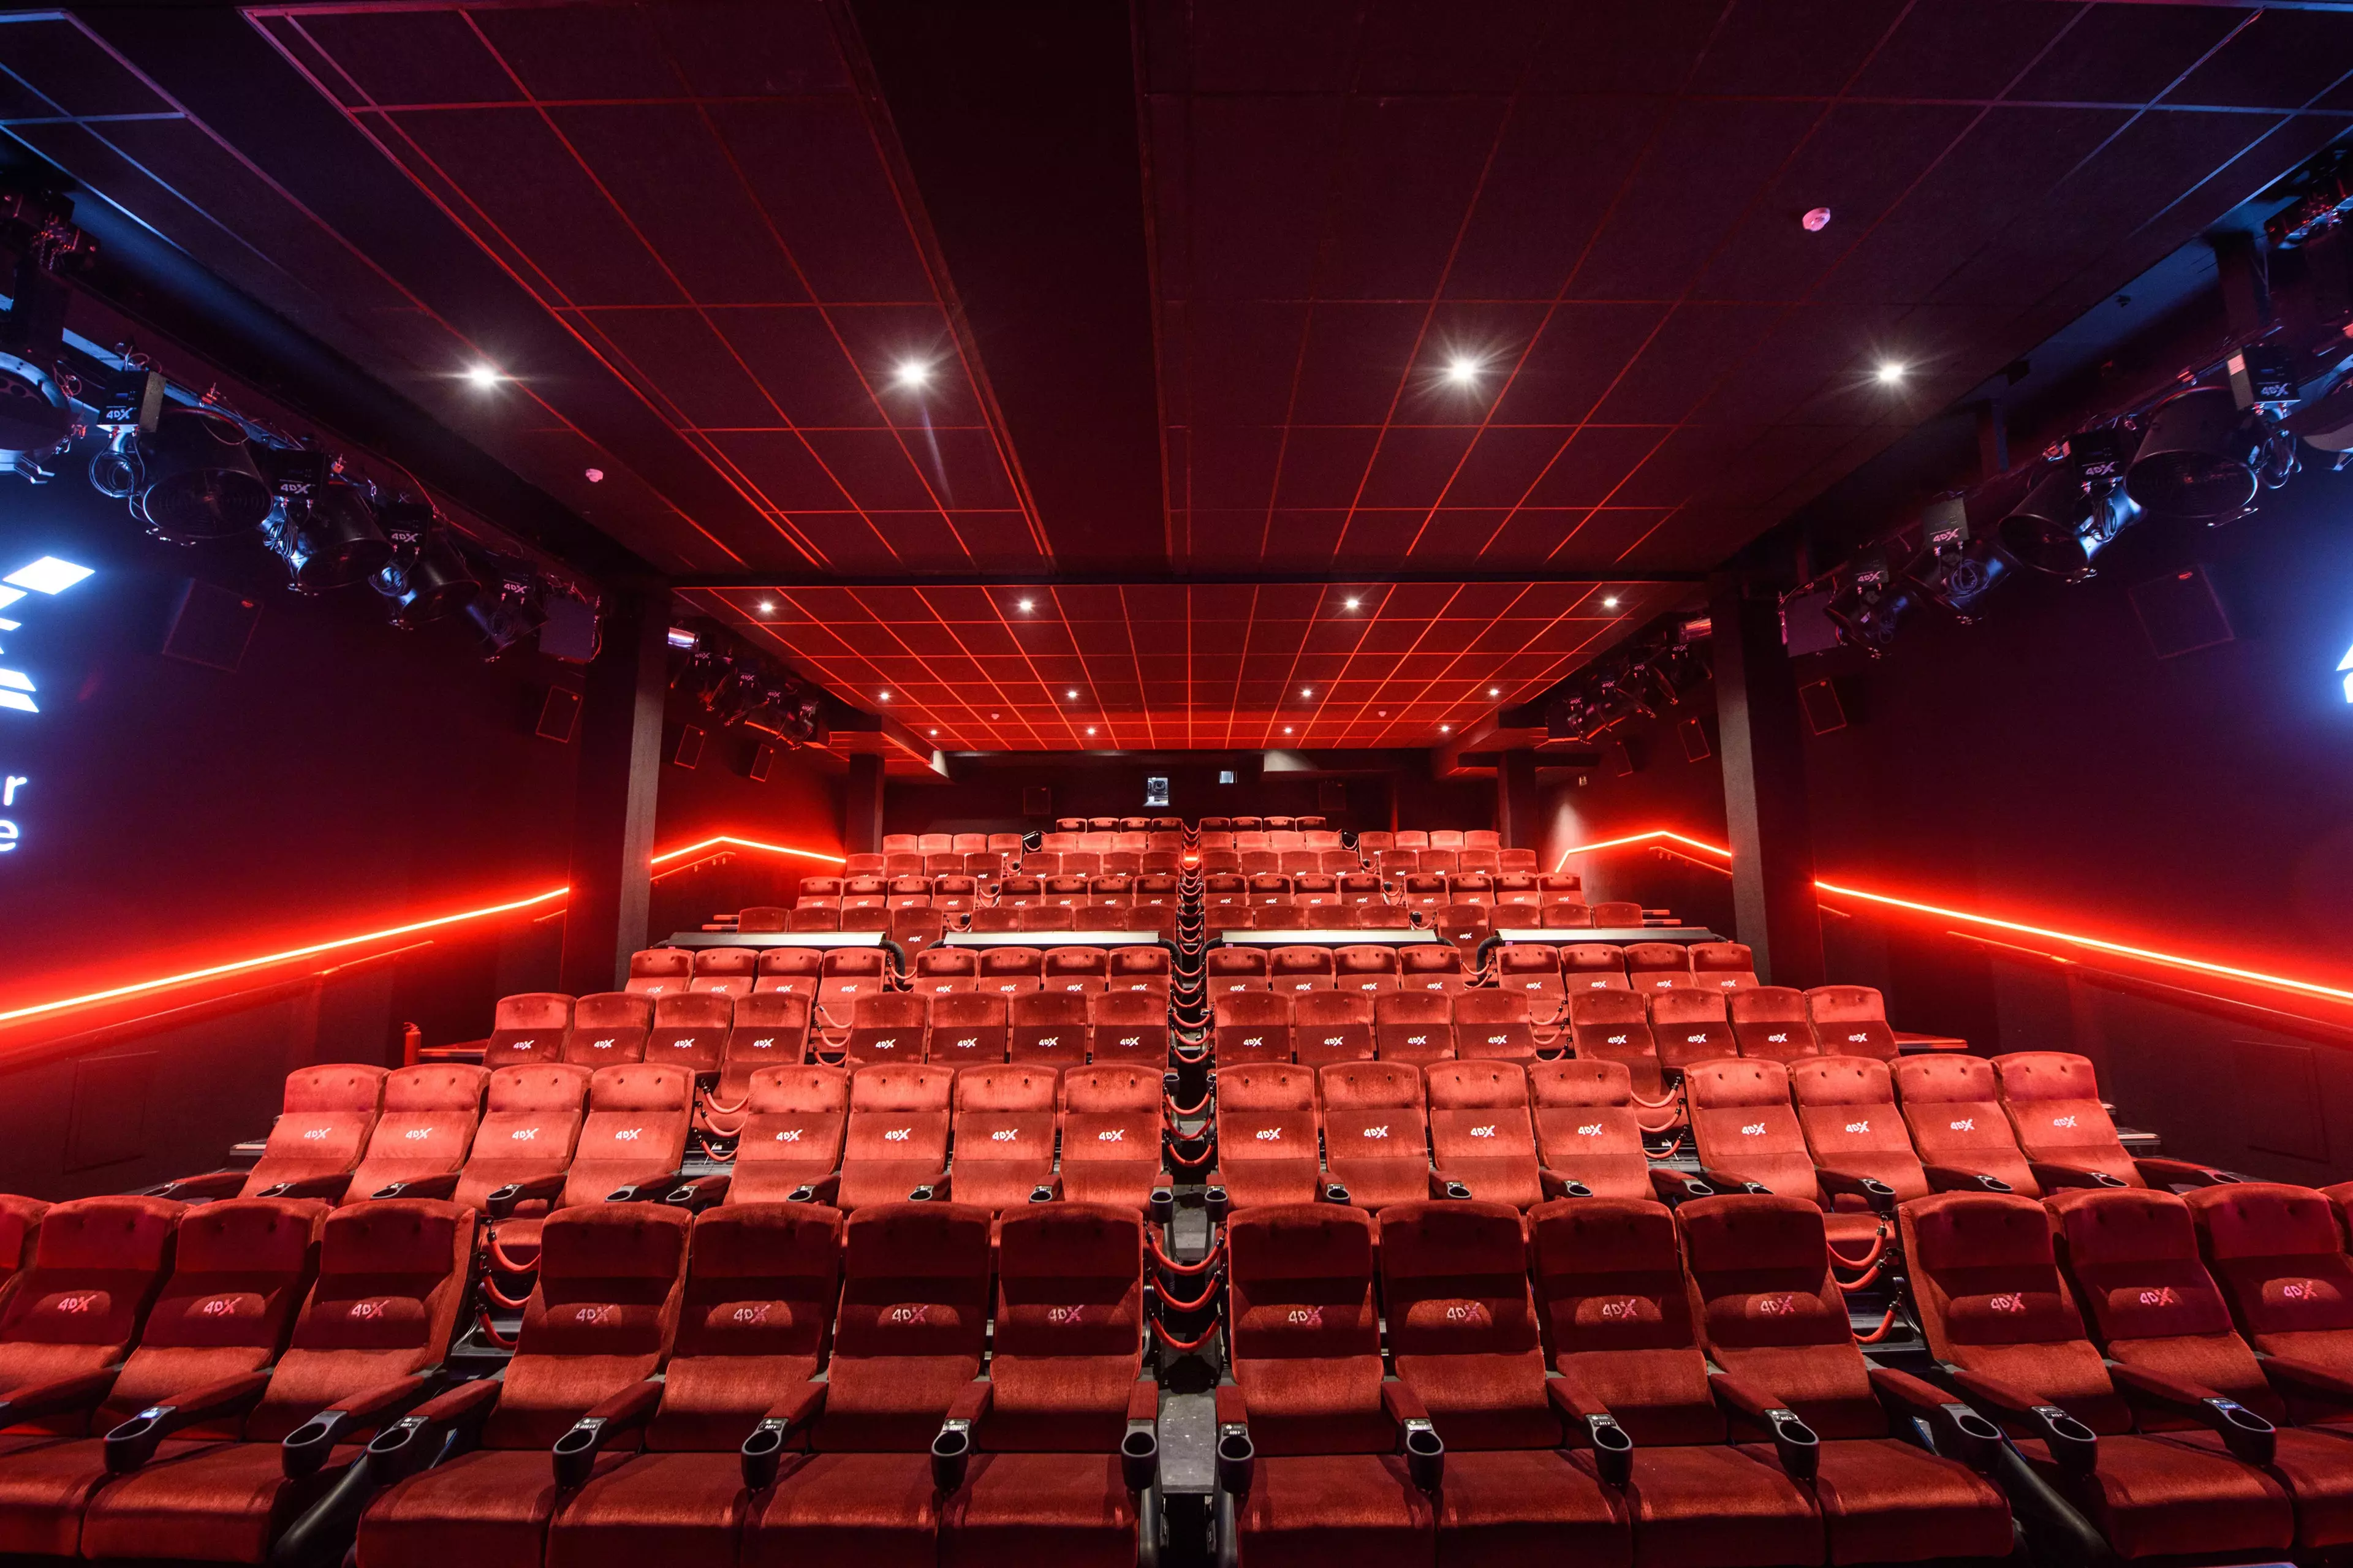 It's believed social distancing restrictions in cinemas will still have to be adhered to (